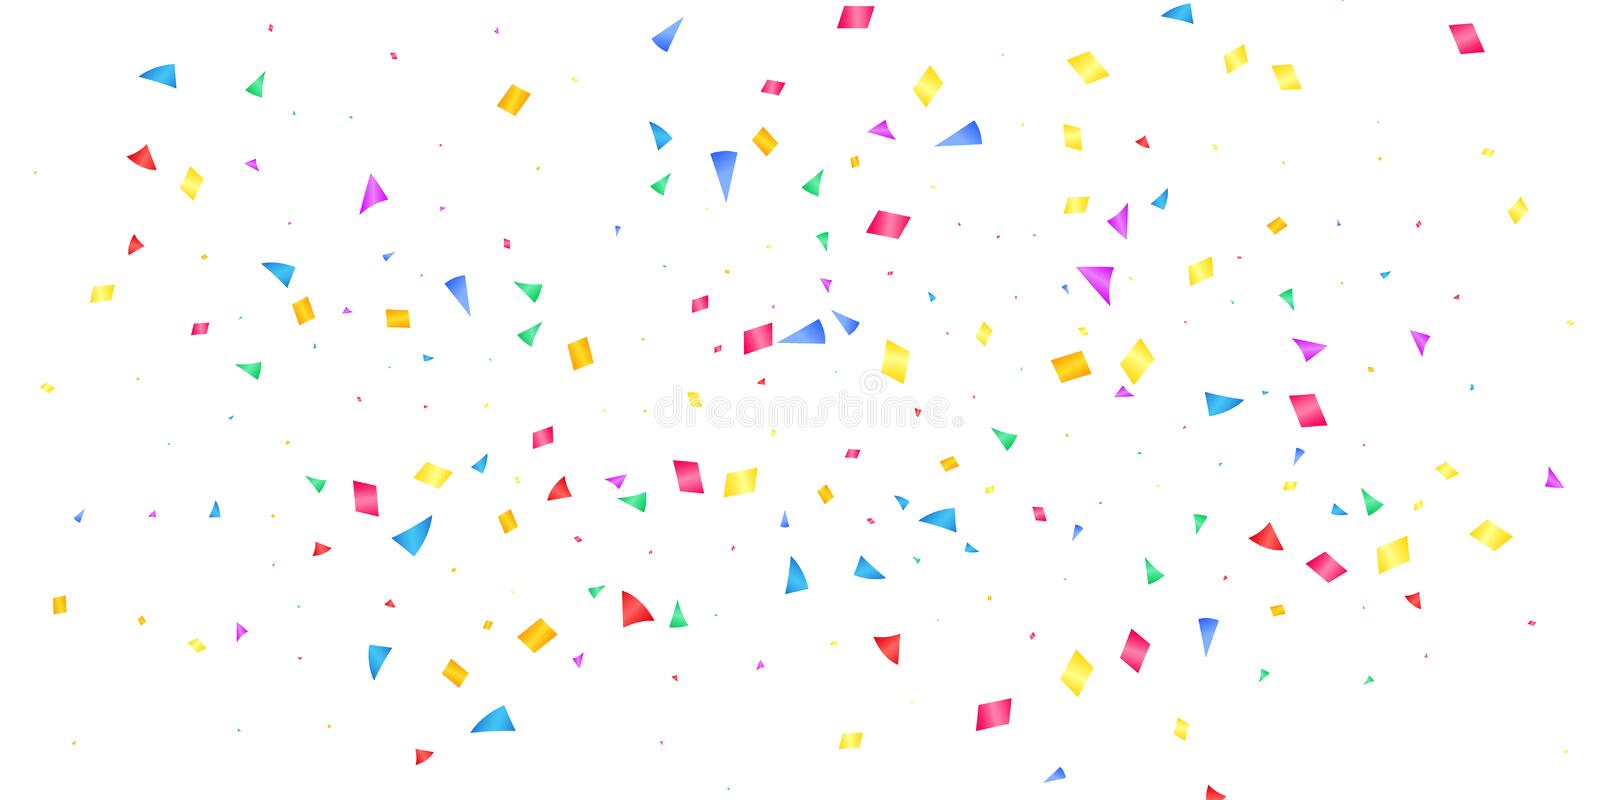 Detail Images Of Confetti Nomer 30